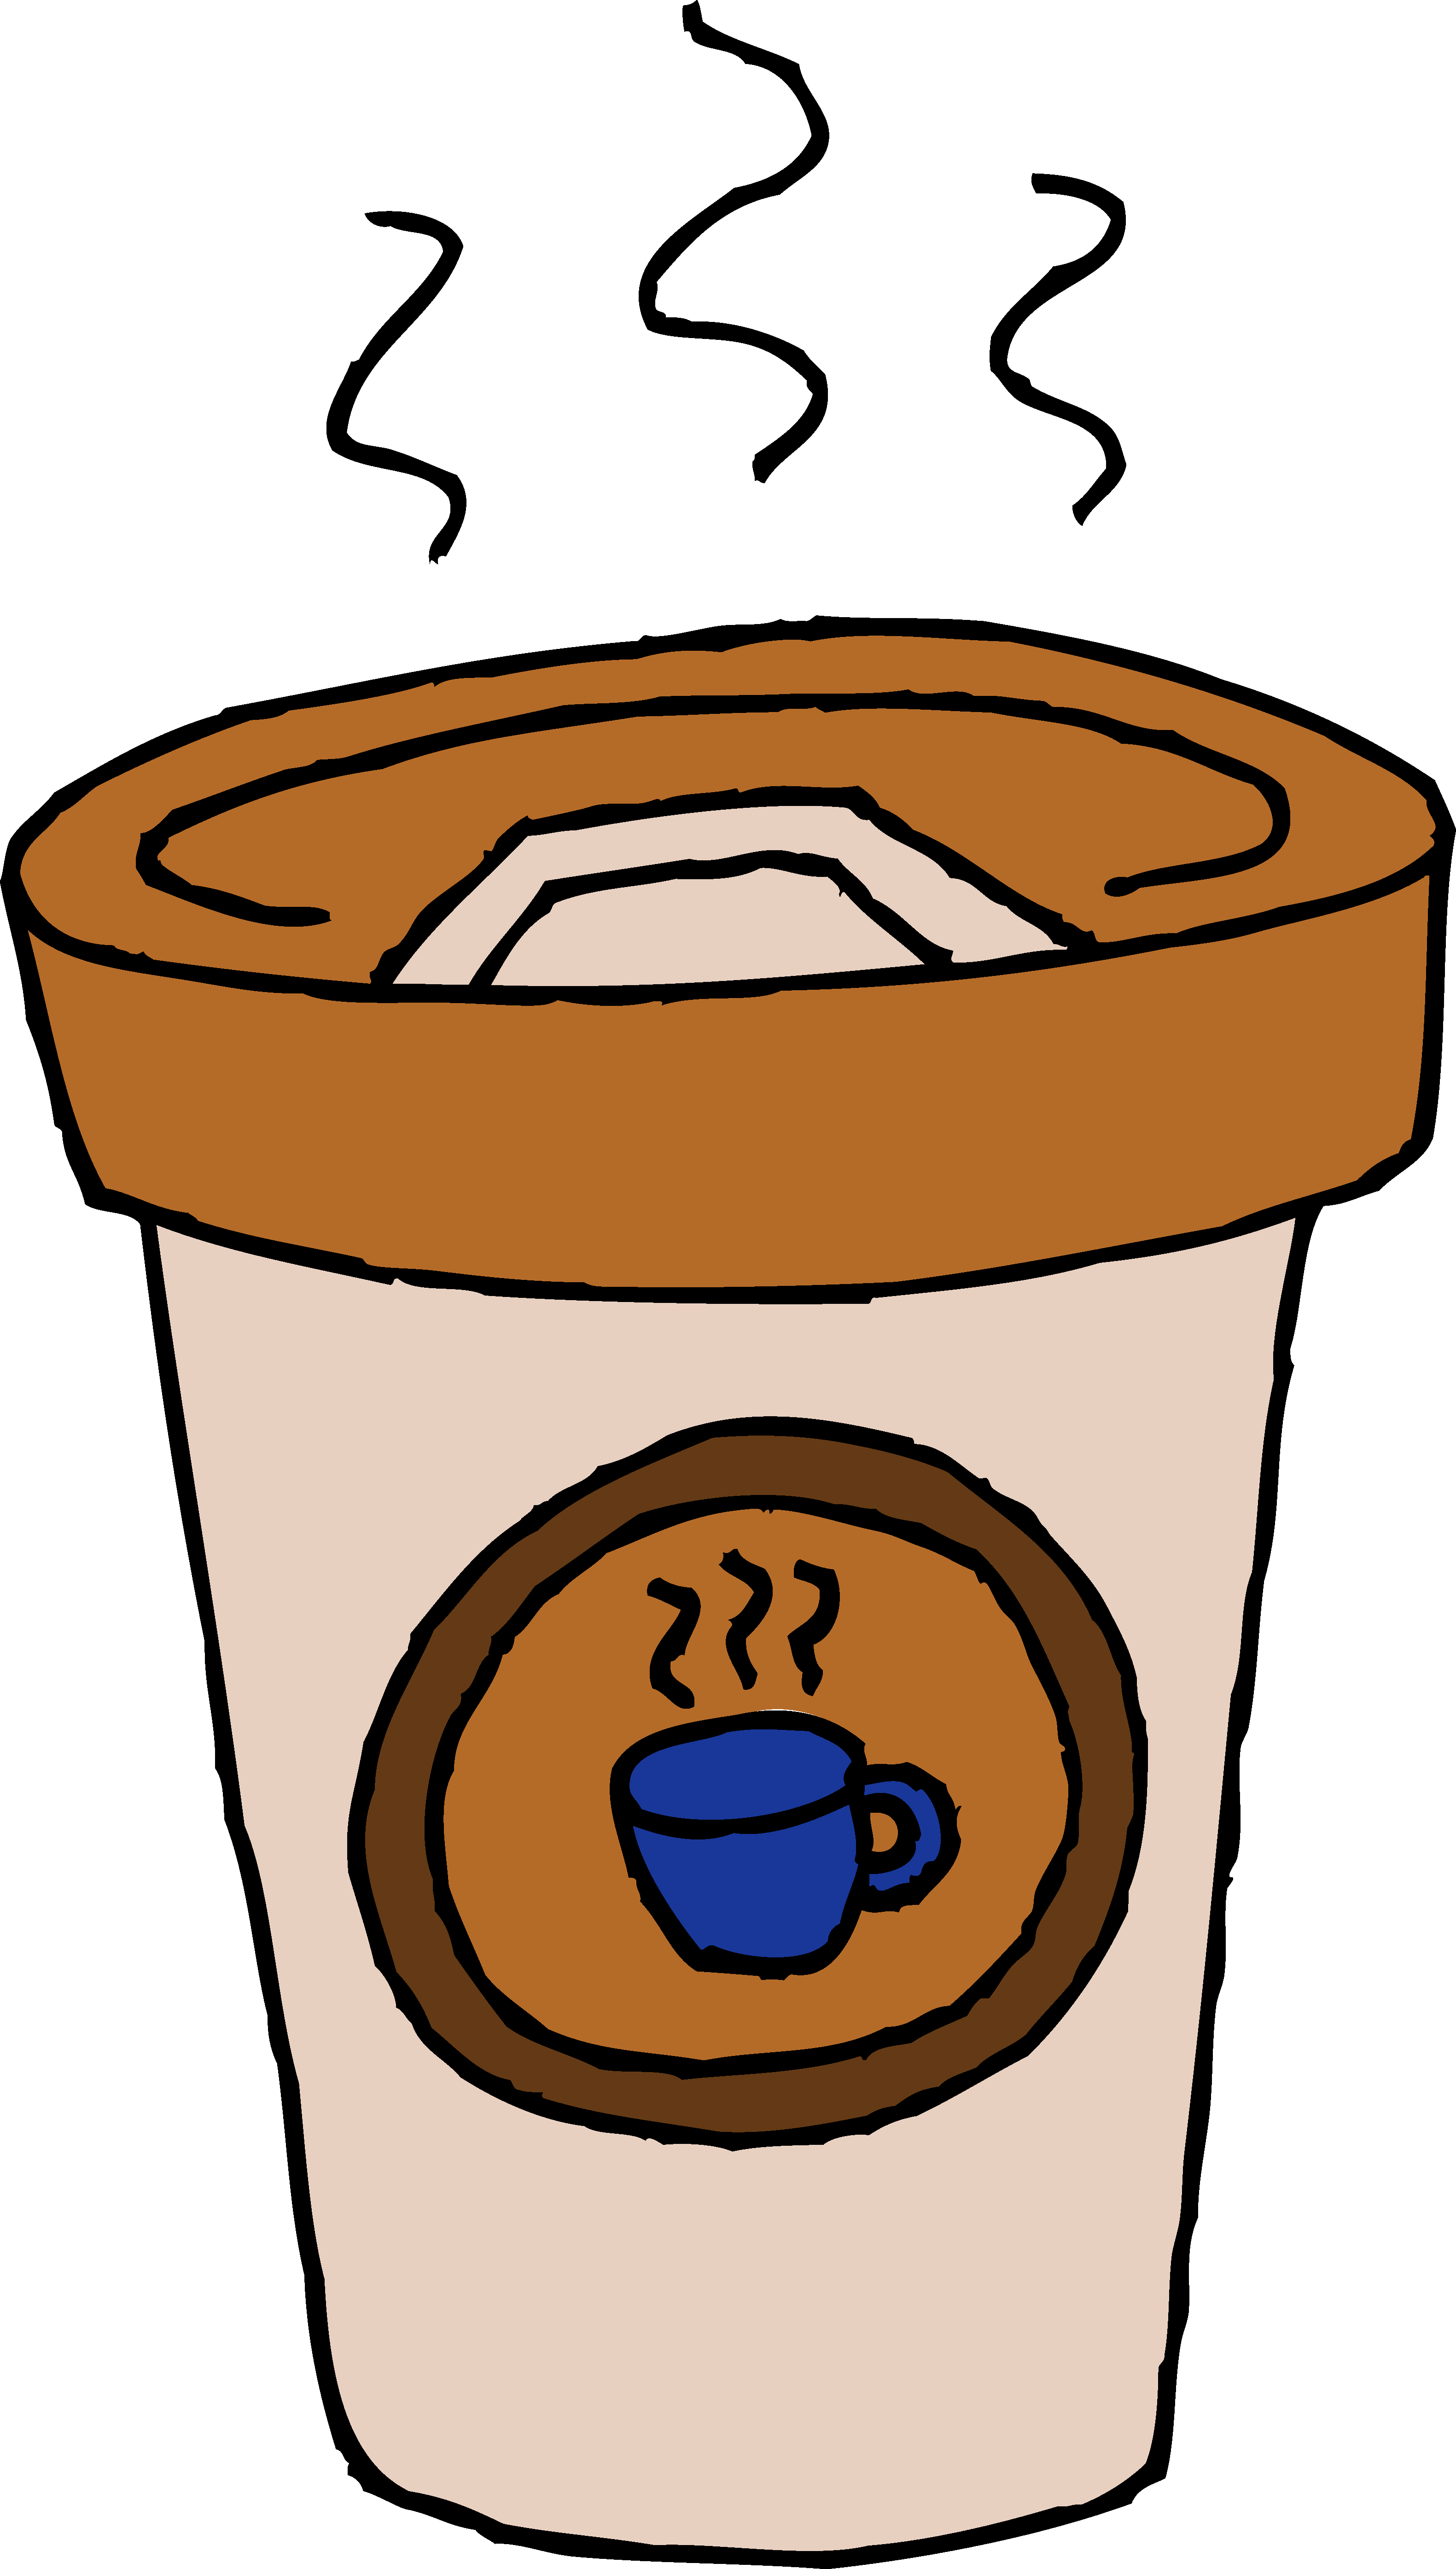 Moving clipart school. Hot cafe latte clip